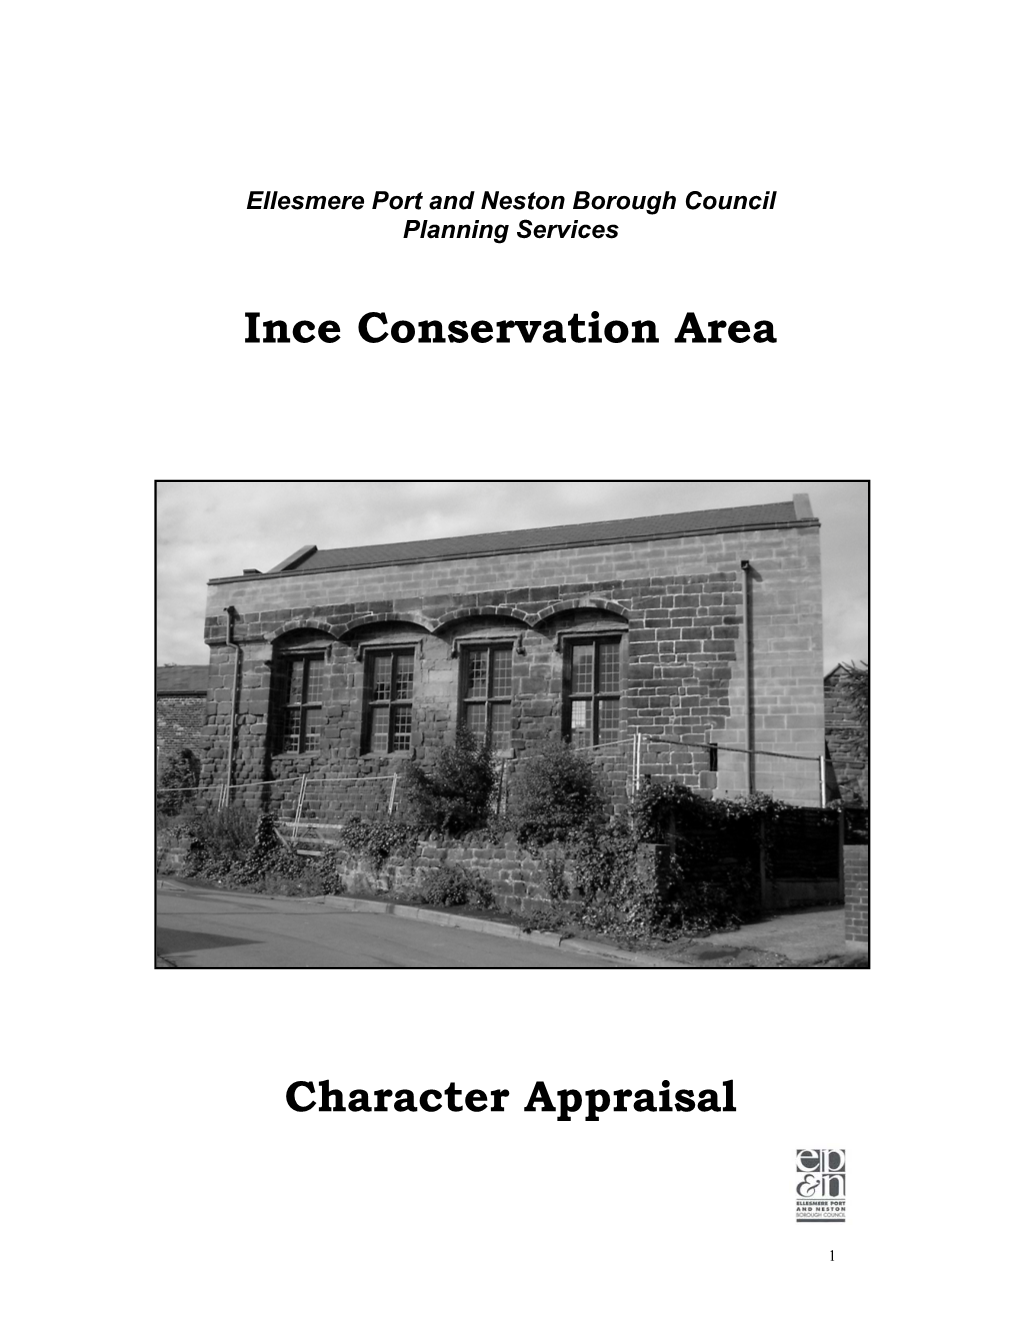 Ince Conservation Area Character Appraisal